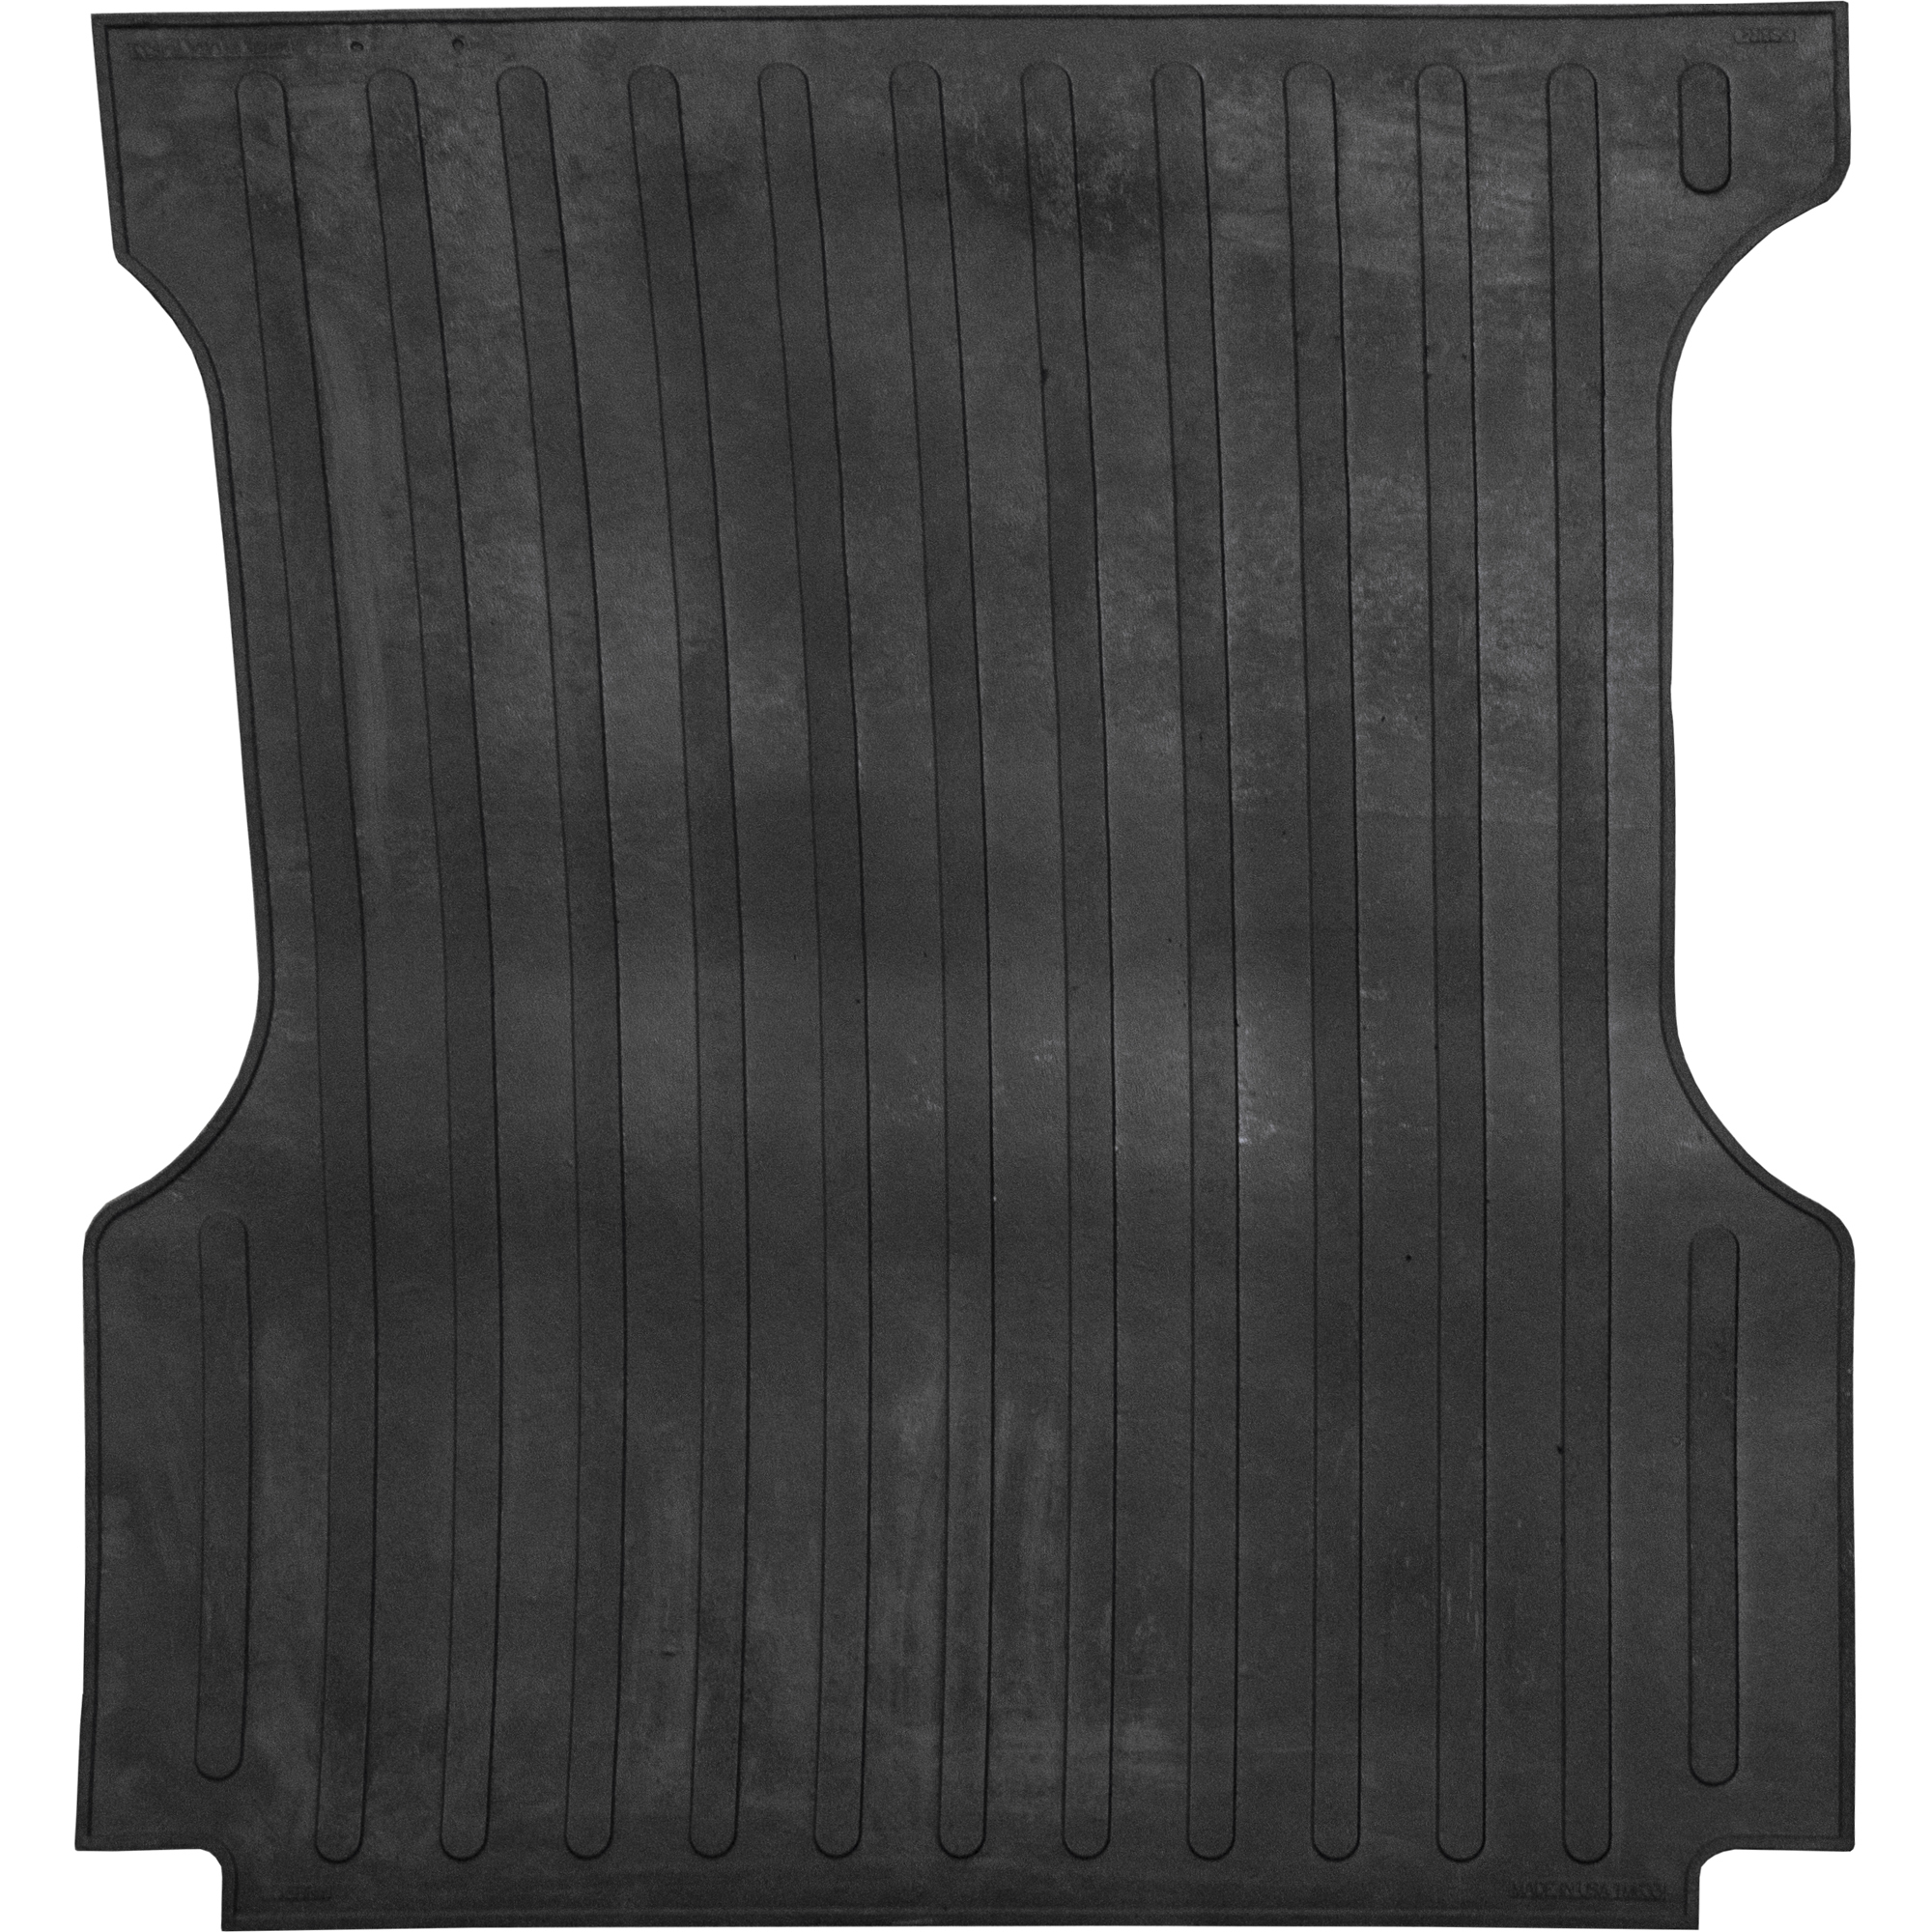 Boomerang Rubber, Chevy/GMC/Sierra 1500-3500 Year 2019+, Bed Mat, 8ft.  Long, Primary Color Black, Model# TM664BAGGED